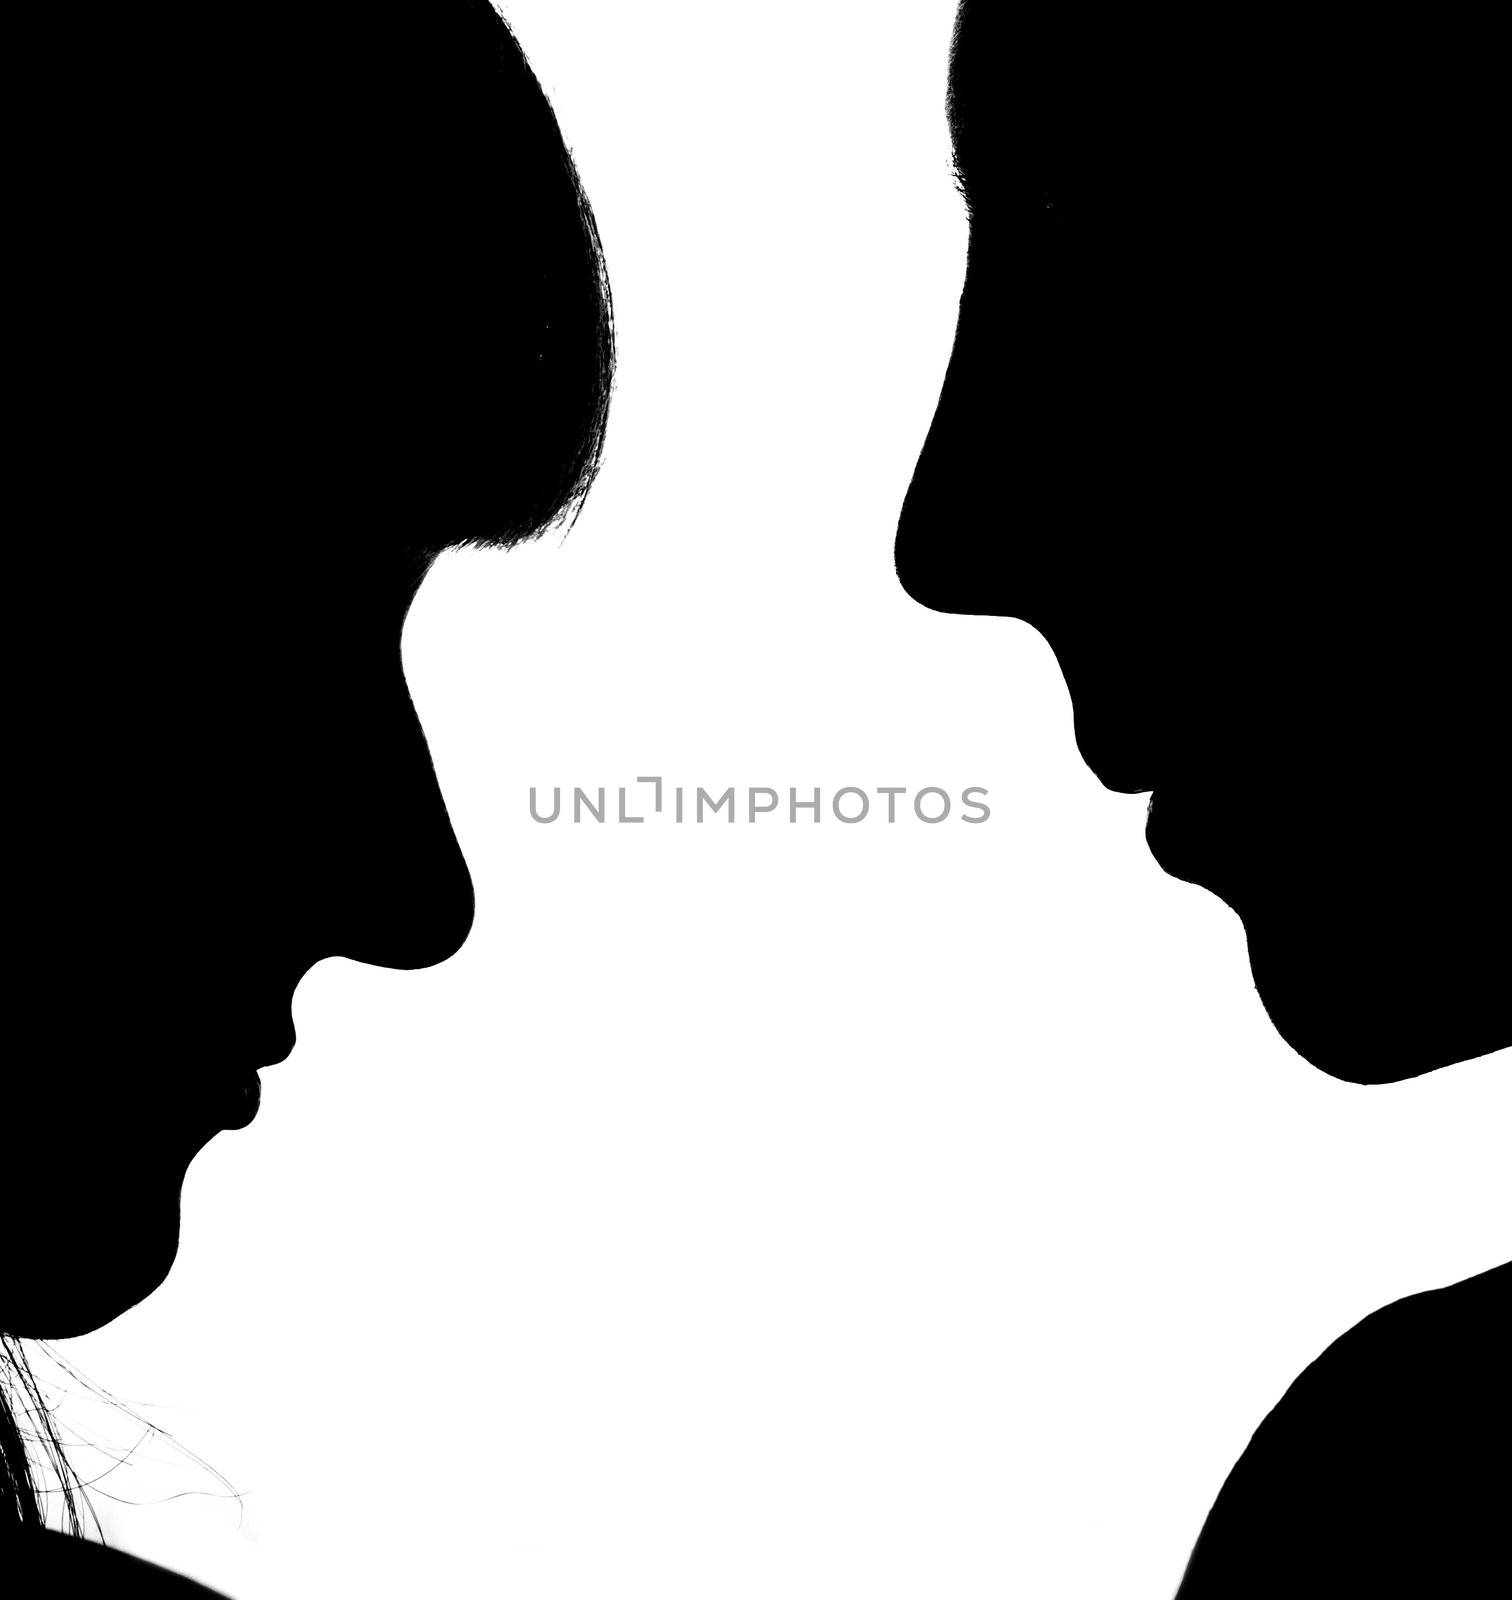 Love theme. Silhouettes of man and woman.